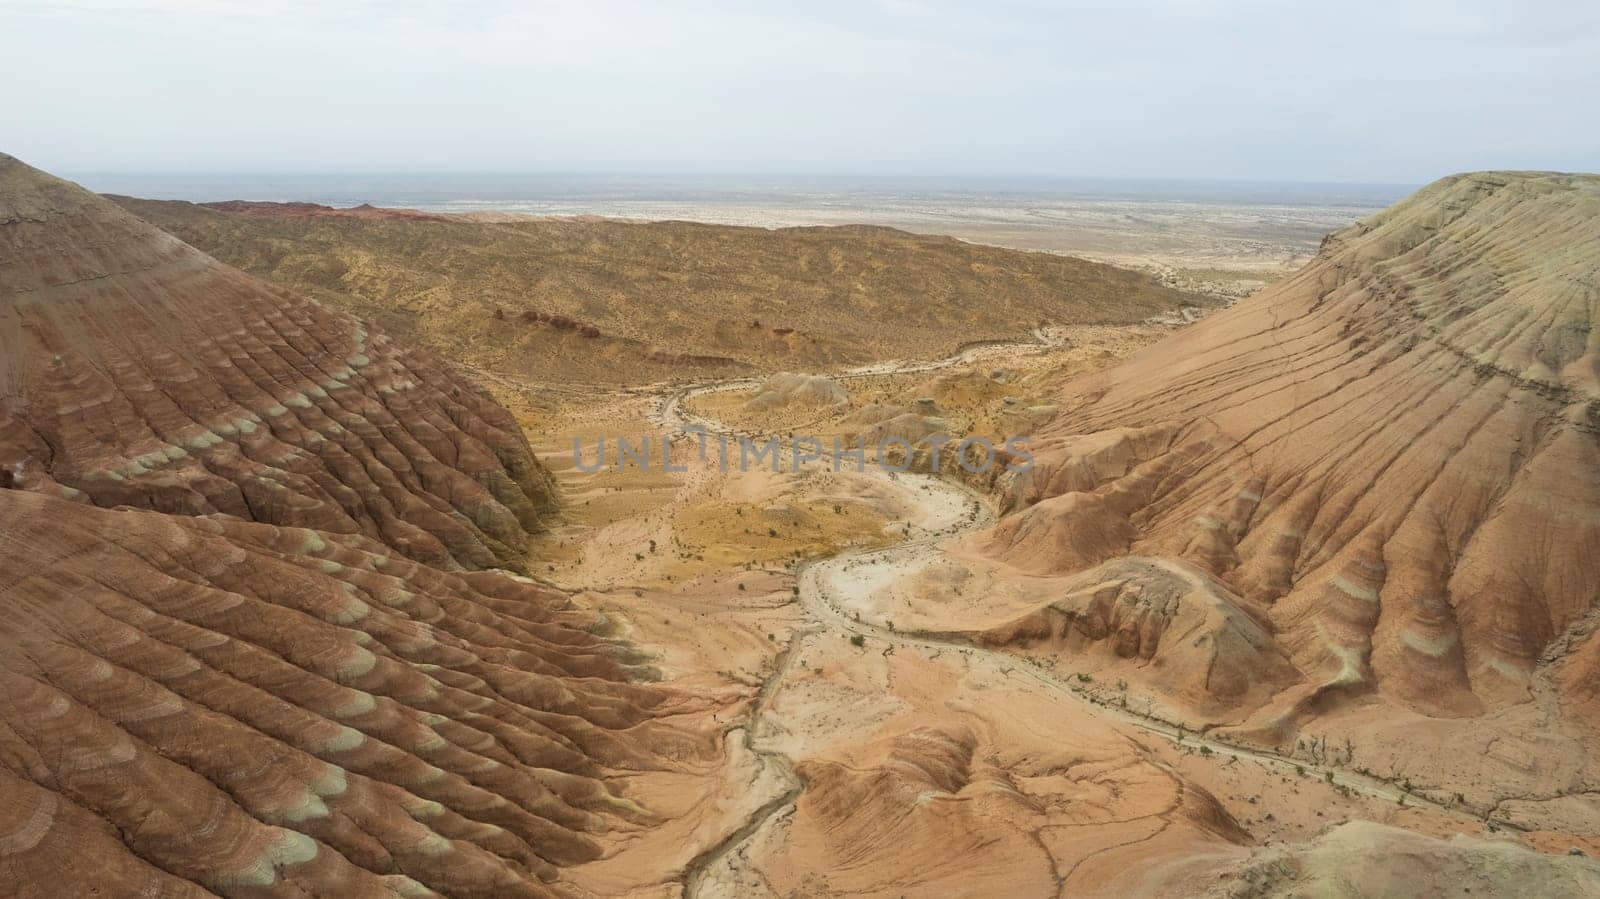 Colorful high mountains and a canyon made of clay. A large gorge with different rocks and different colors. Red, orange, white and yellow flowers of the walls of the rocks. A tourist walks. Aktau